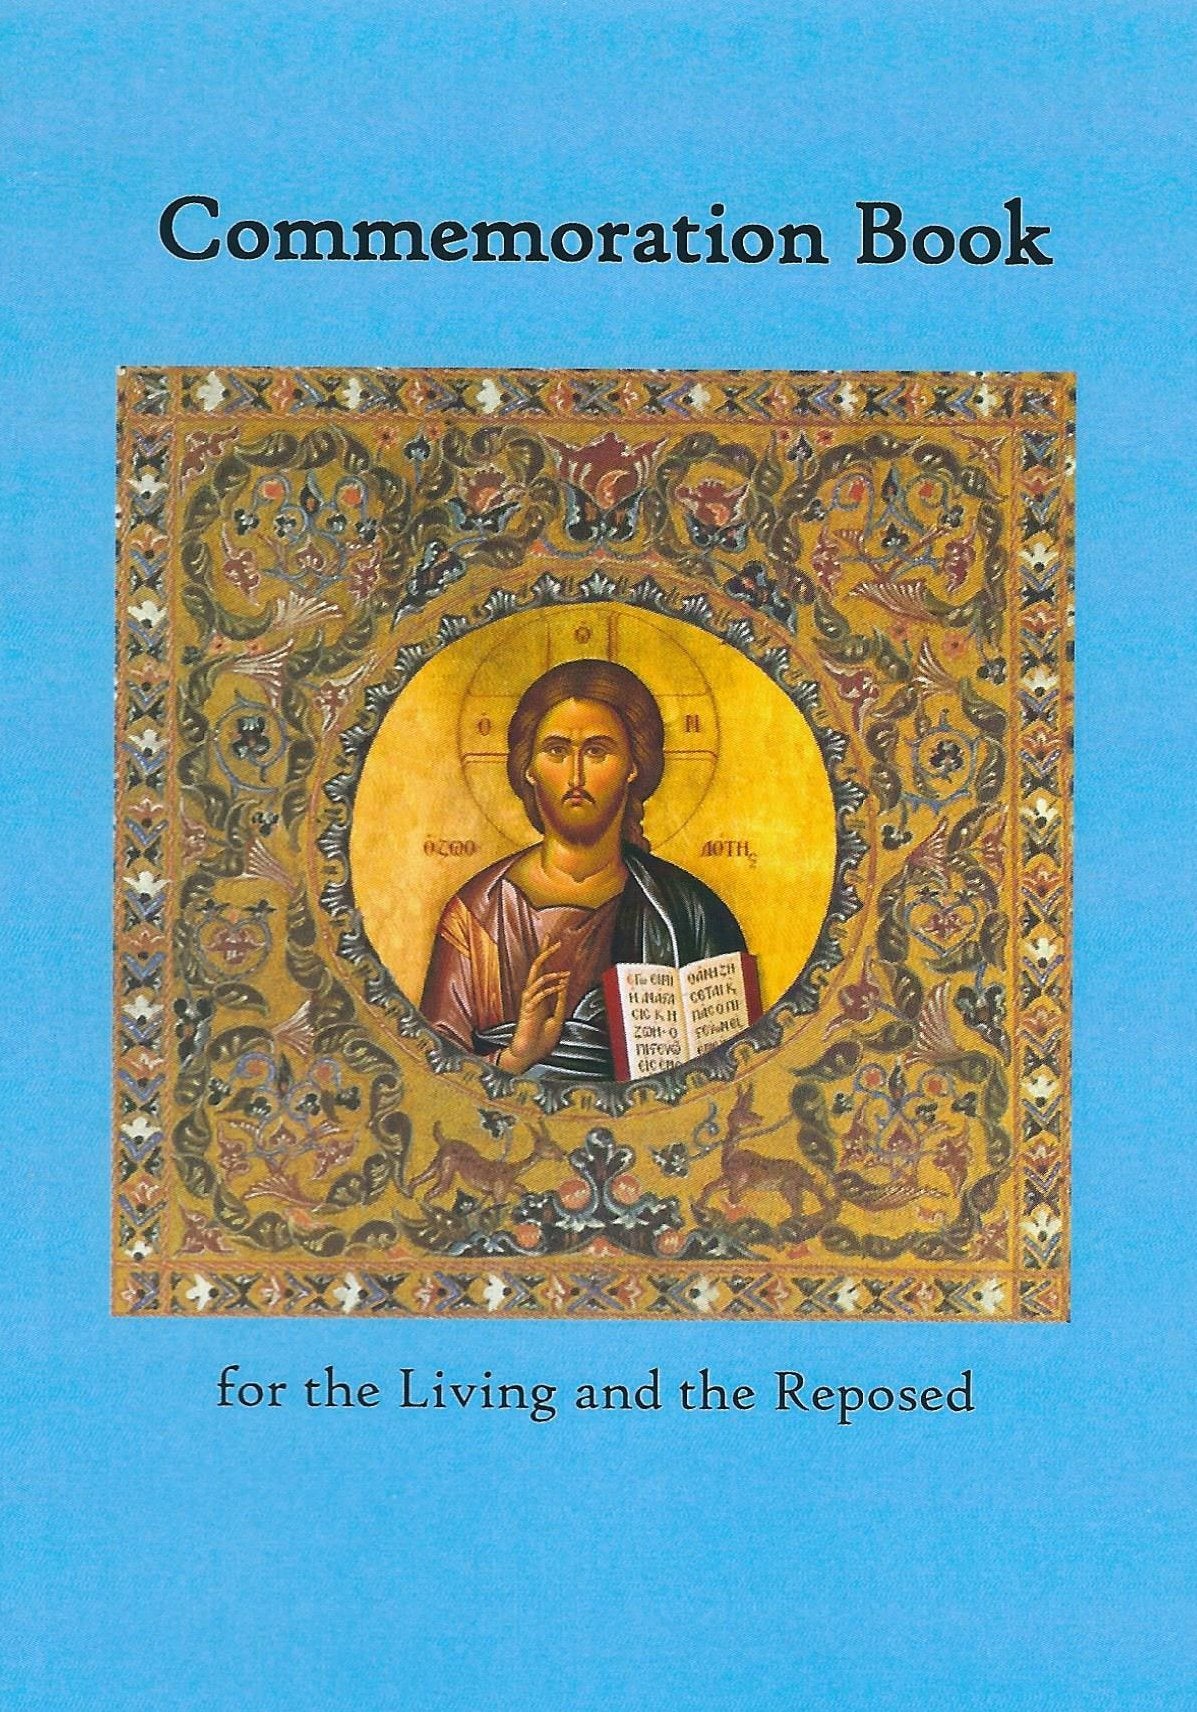 Commemoration Book - Our Lord Jesus Christ